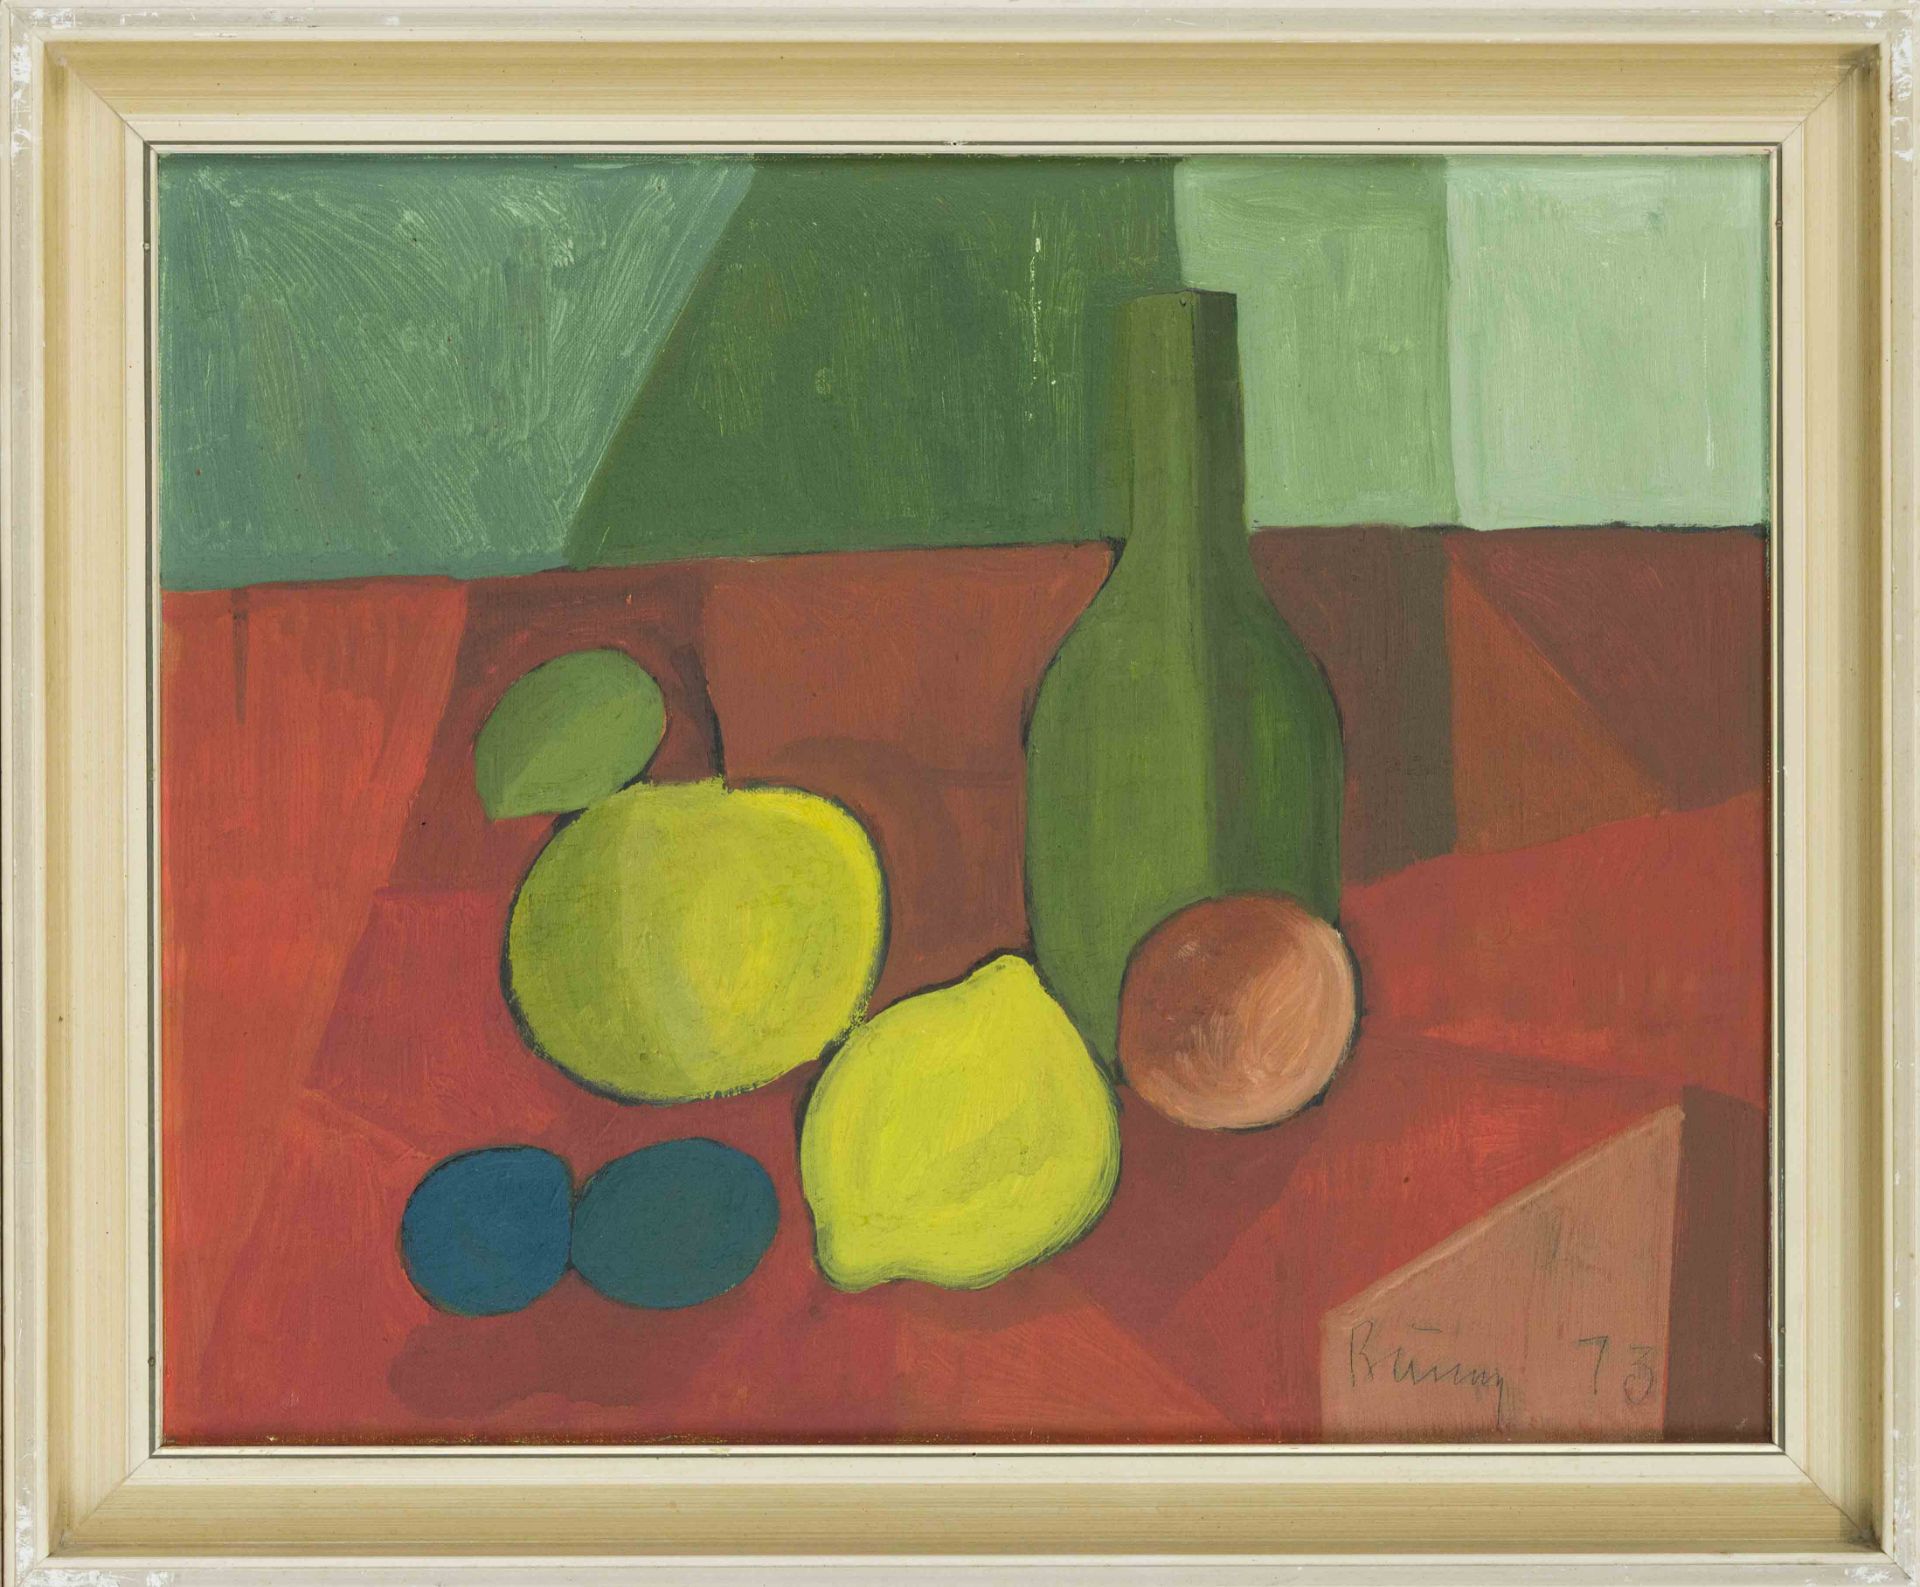 Unidentified artist c. 1970, abstract still life with lemons, oil on canvas, indistinctly signed and